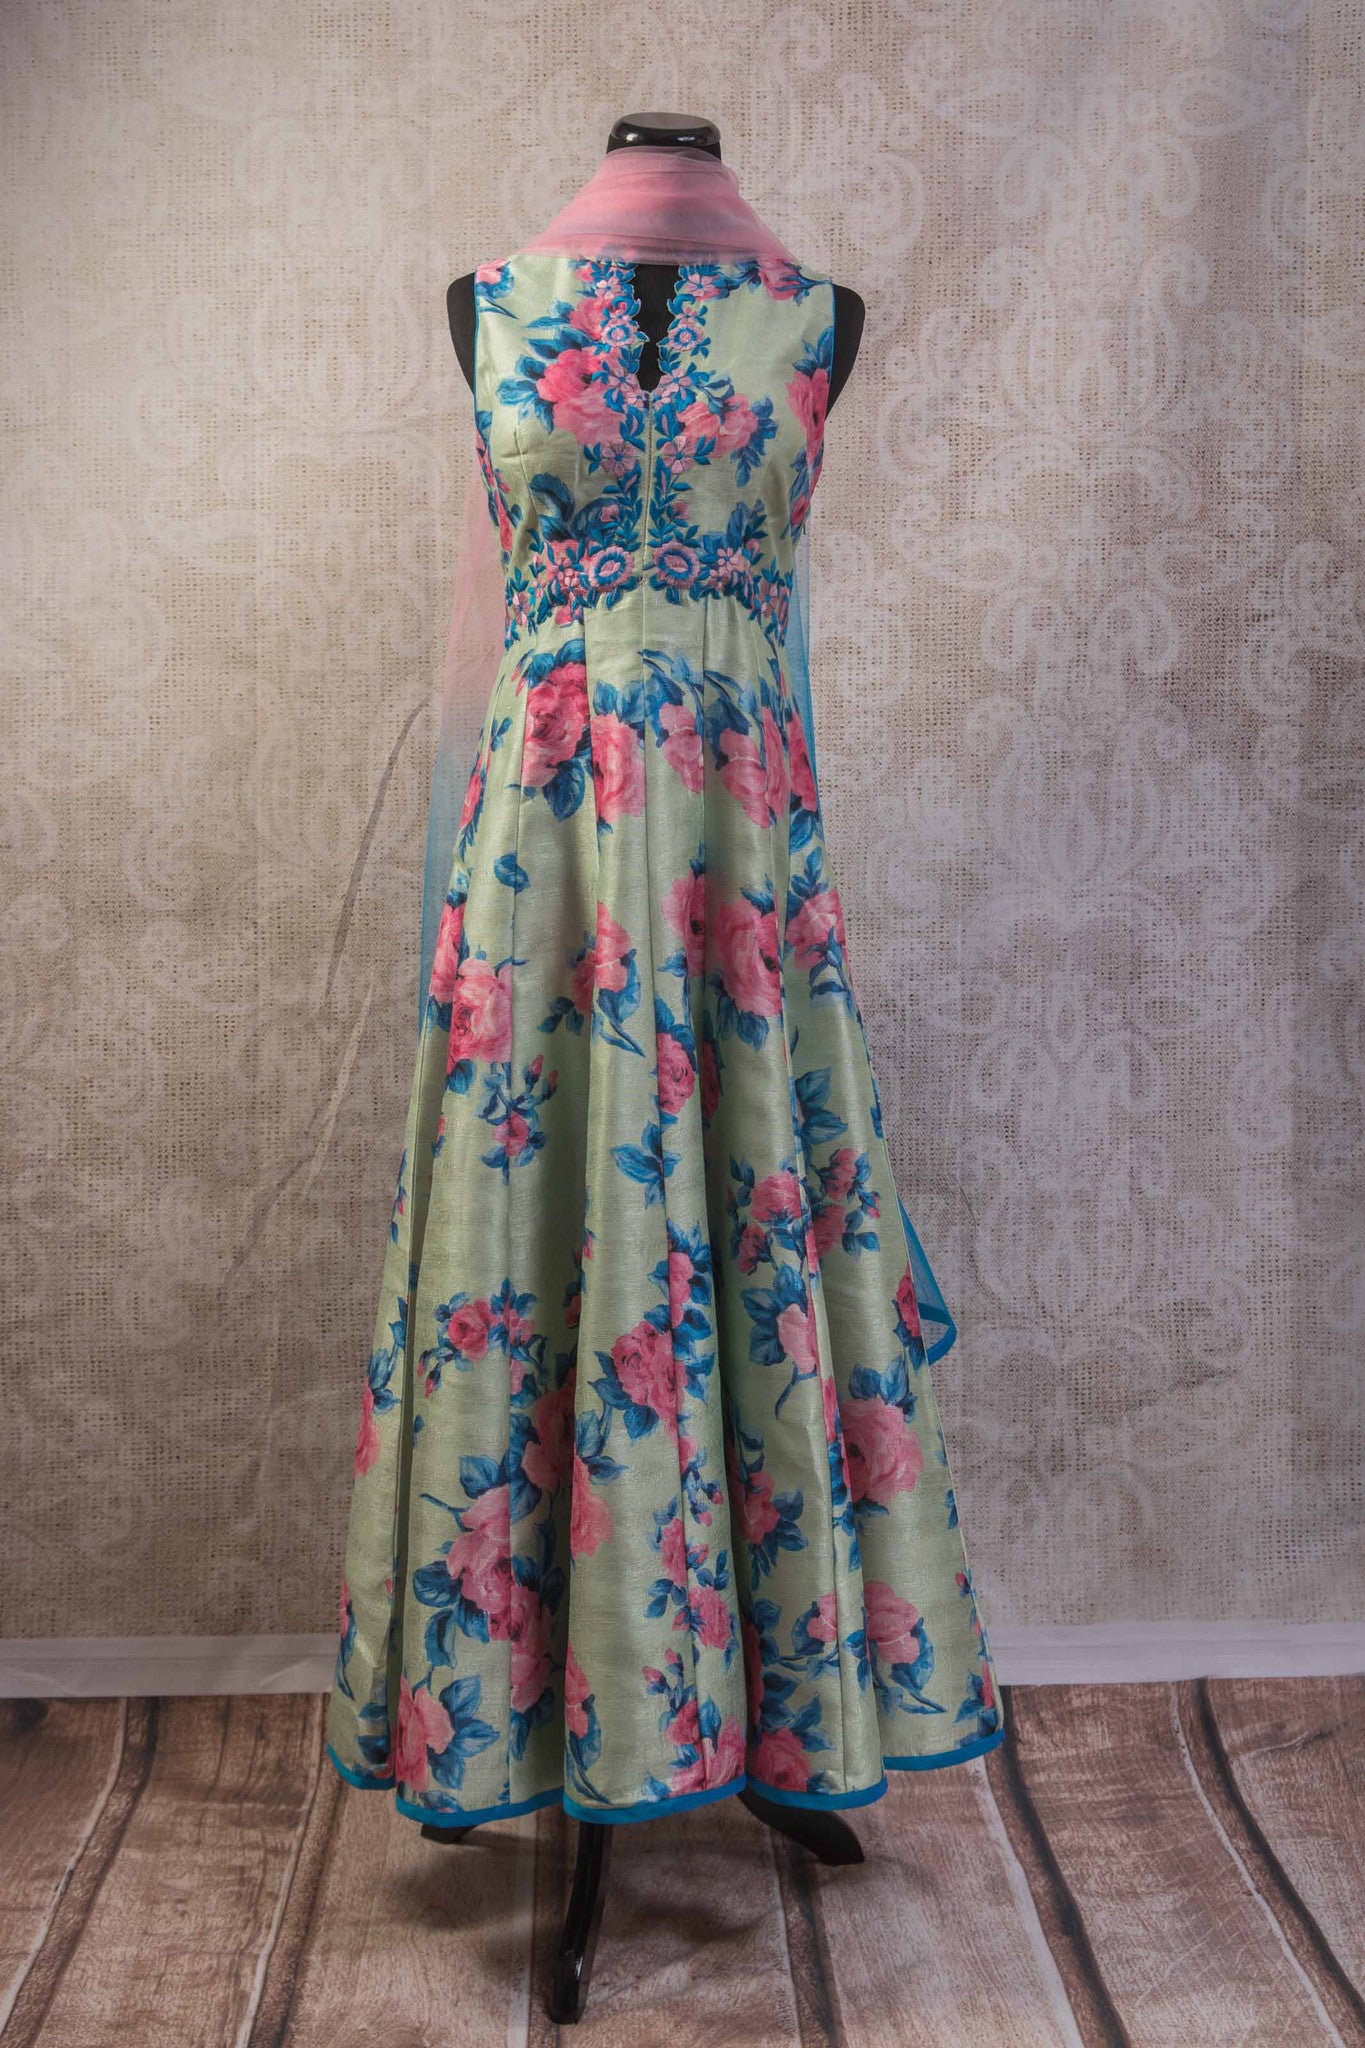 Suit Sleeveless Pale Green Pink And Blue Floral Print With Han